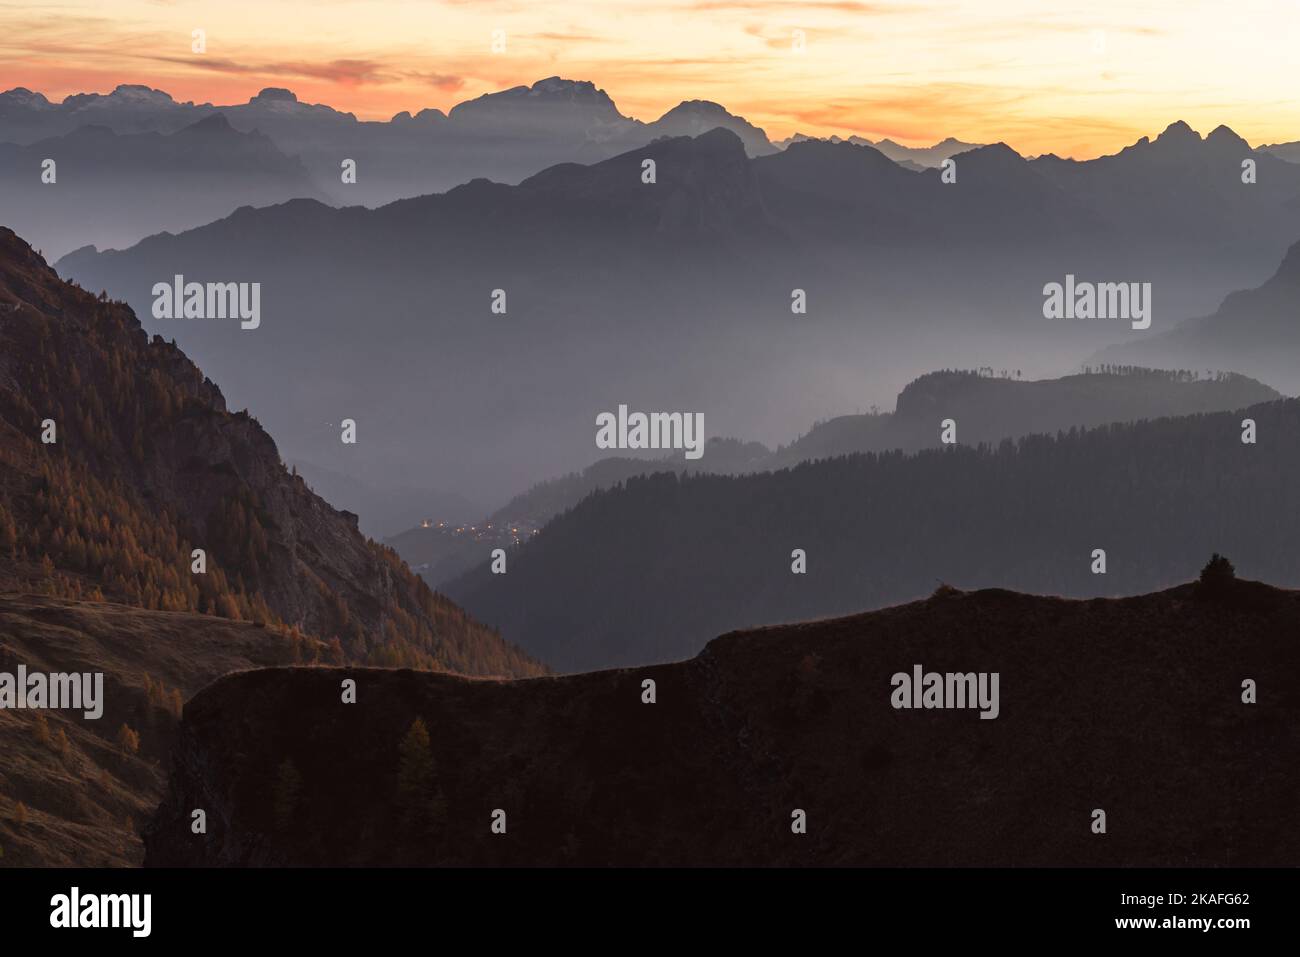 Dusk twilight over the autumnal landscape with valleys and mountain ranges of the Civetta Group and Ampezzo Dolomites, Passo di Giau, Dolomites, Italy Stock Photo